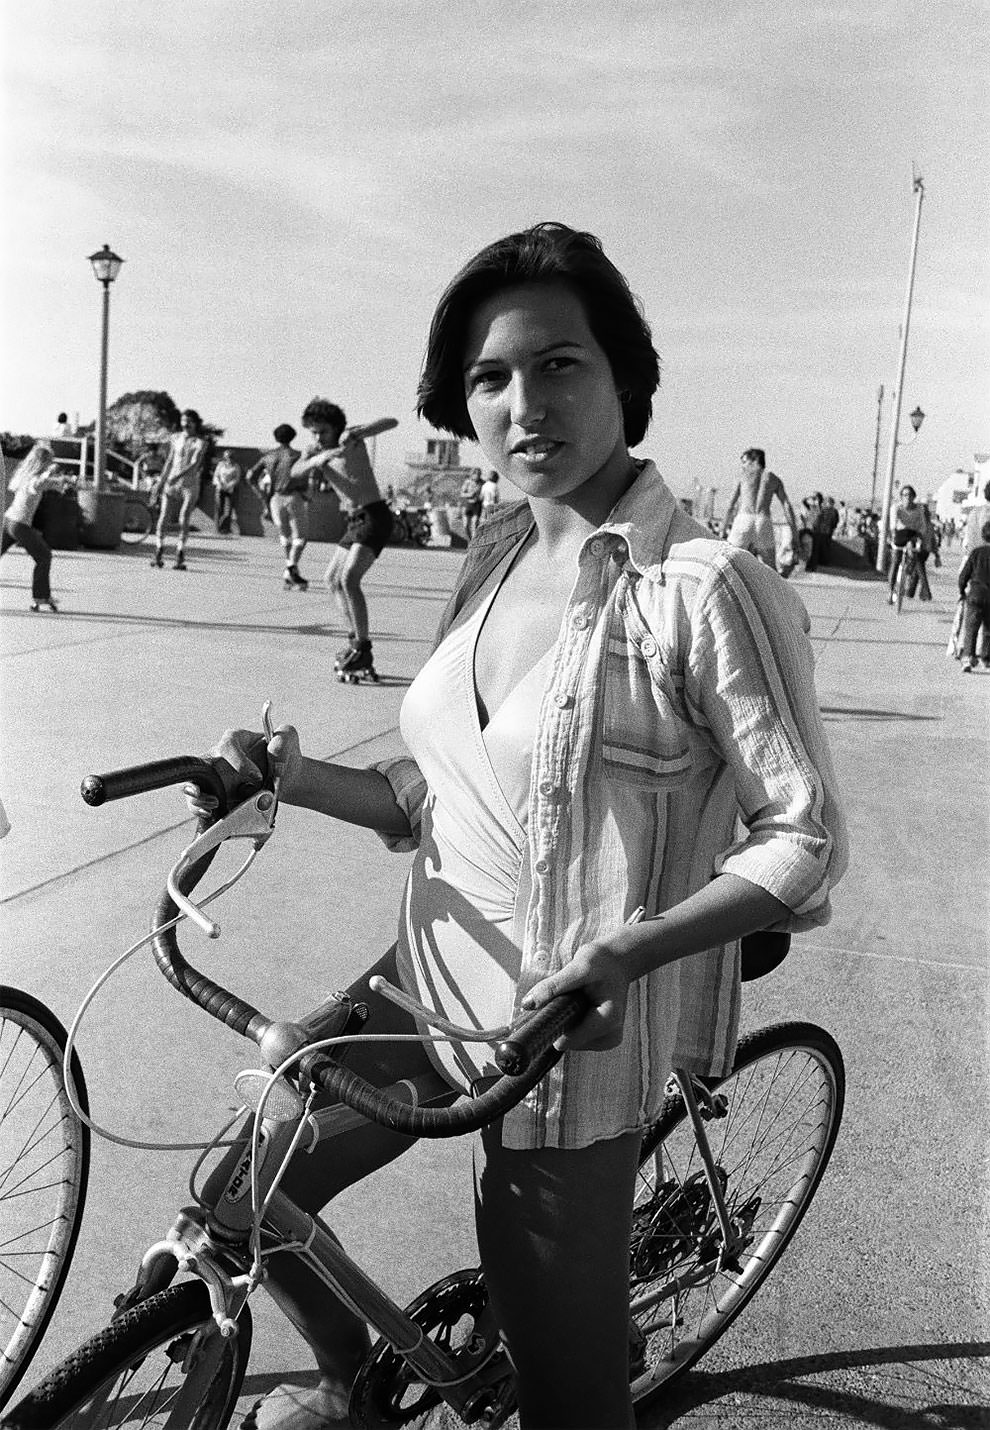 Skaters And Punkers: 50+ Stunning Photos Capturing Californian Youth From 1970s-80s